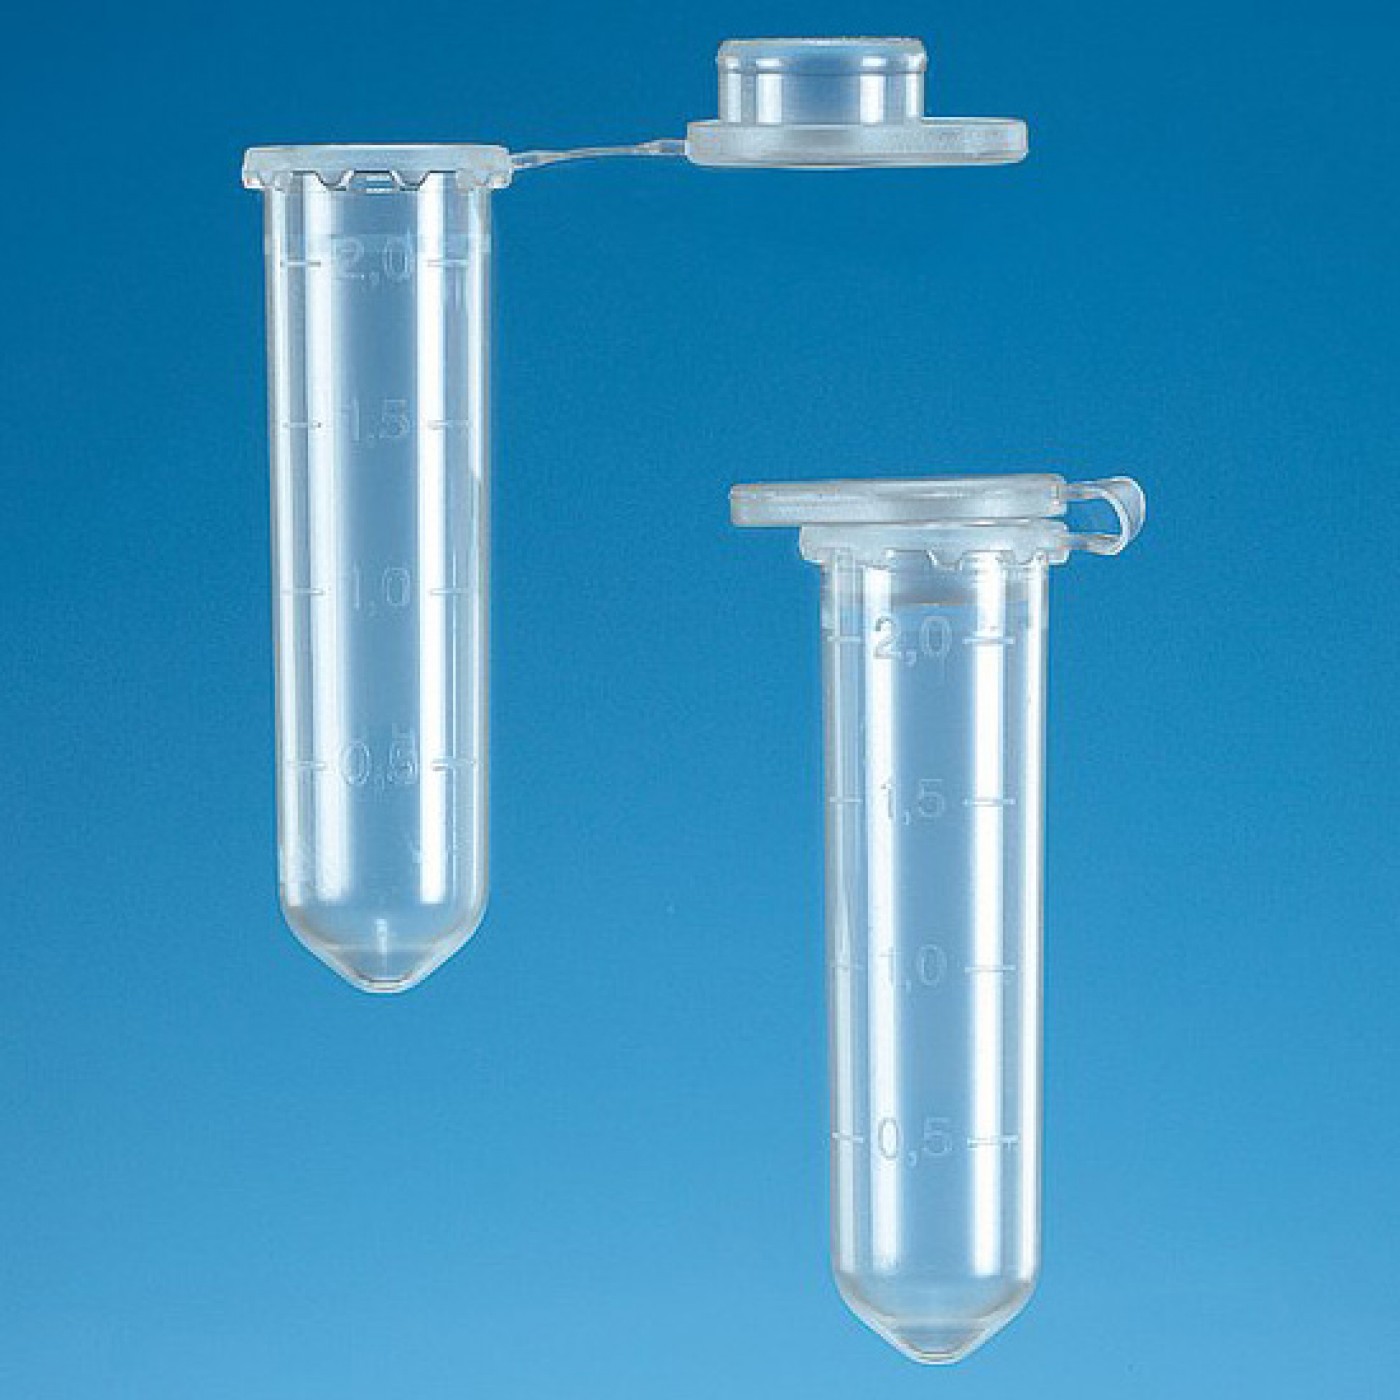 BrandTech 780550 Non-Sterile Clear Microcentrifuge Tubes with Lids 2mL